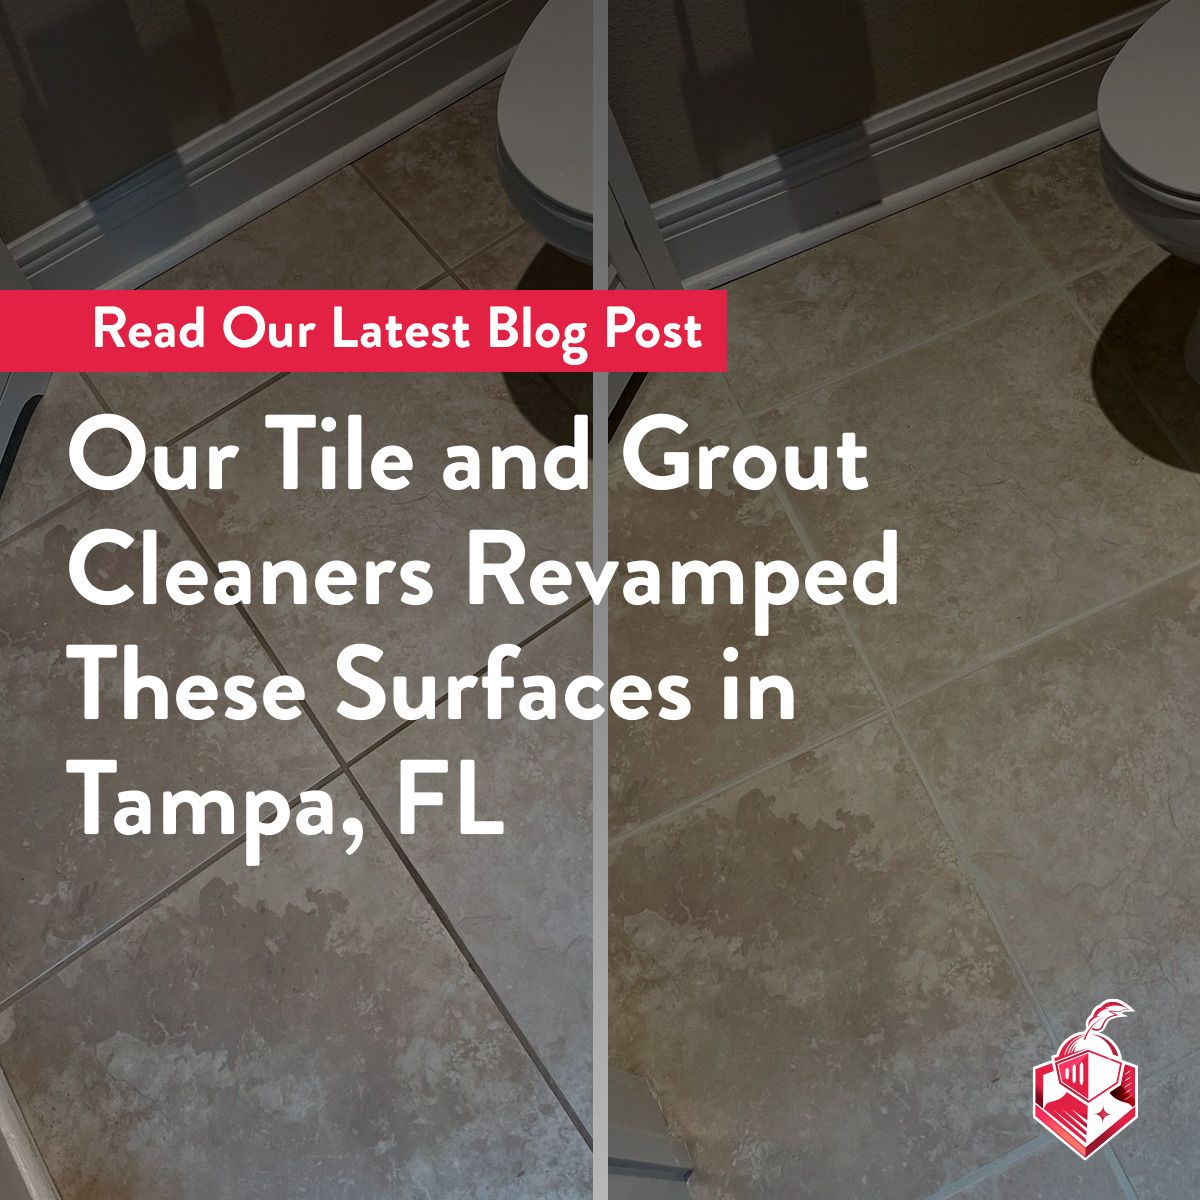 Our Tile and Grout Cleaners Revamped These Surfaces in Tampa, FL